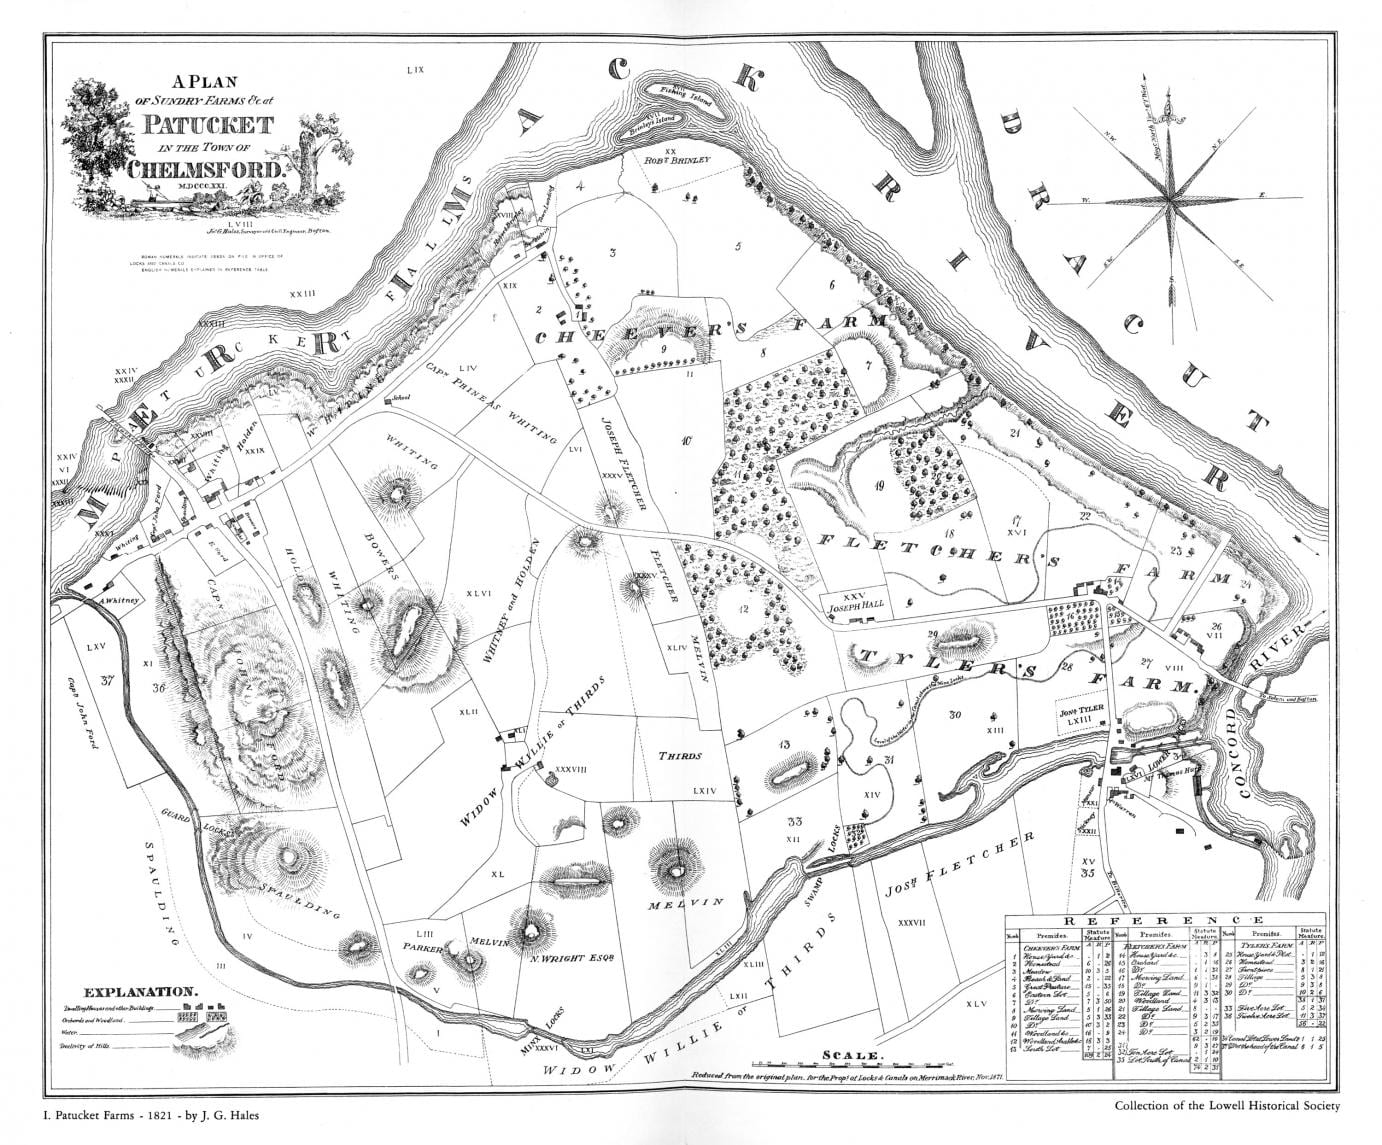 “A Plan of Sundry Farms Est. at Patucket in the Town of Chelmsford” (1821)